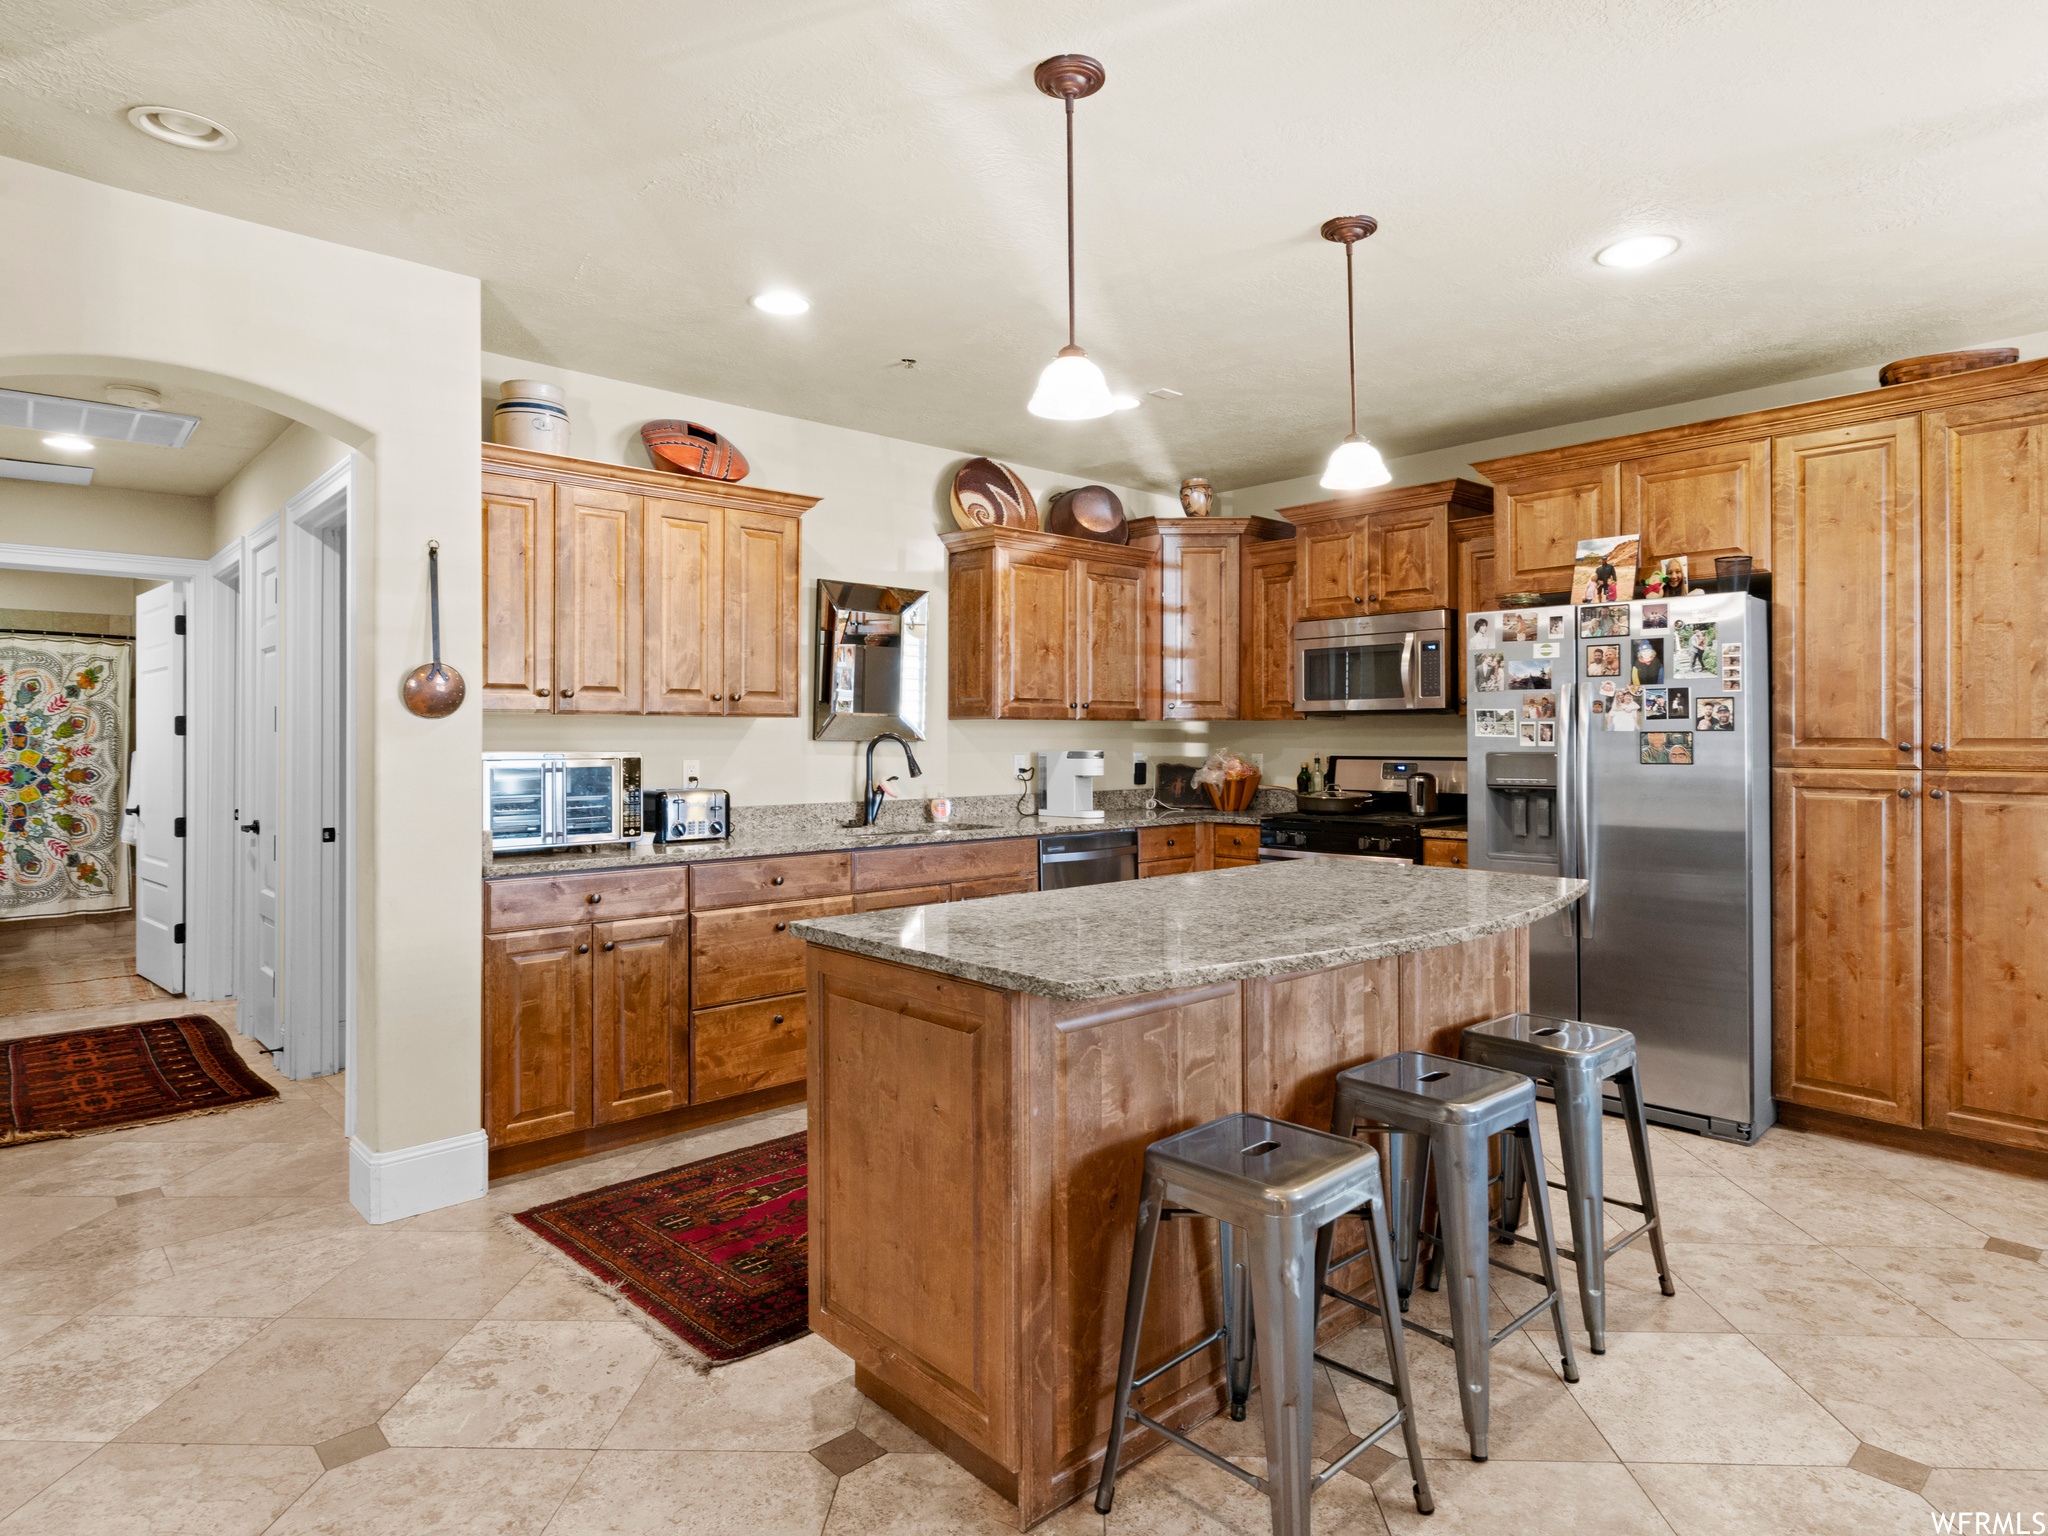 Kitchen with appliances with stainless steel finishes, decorative light fixtures, a center island, light stone counters, wood cabinets, and light tile floors